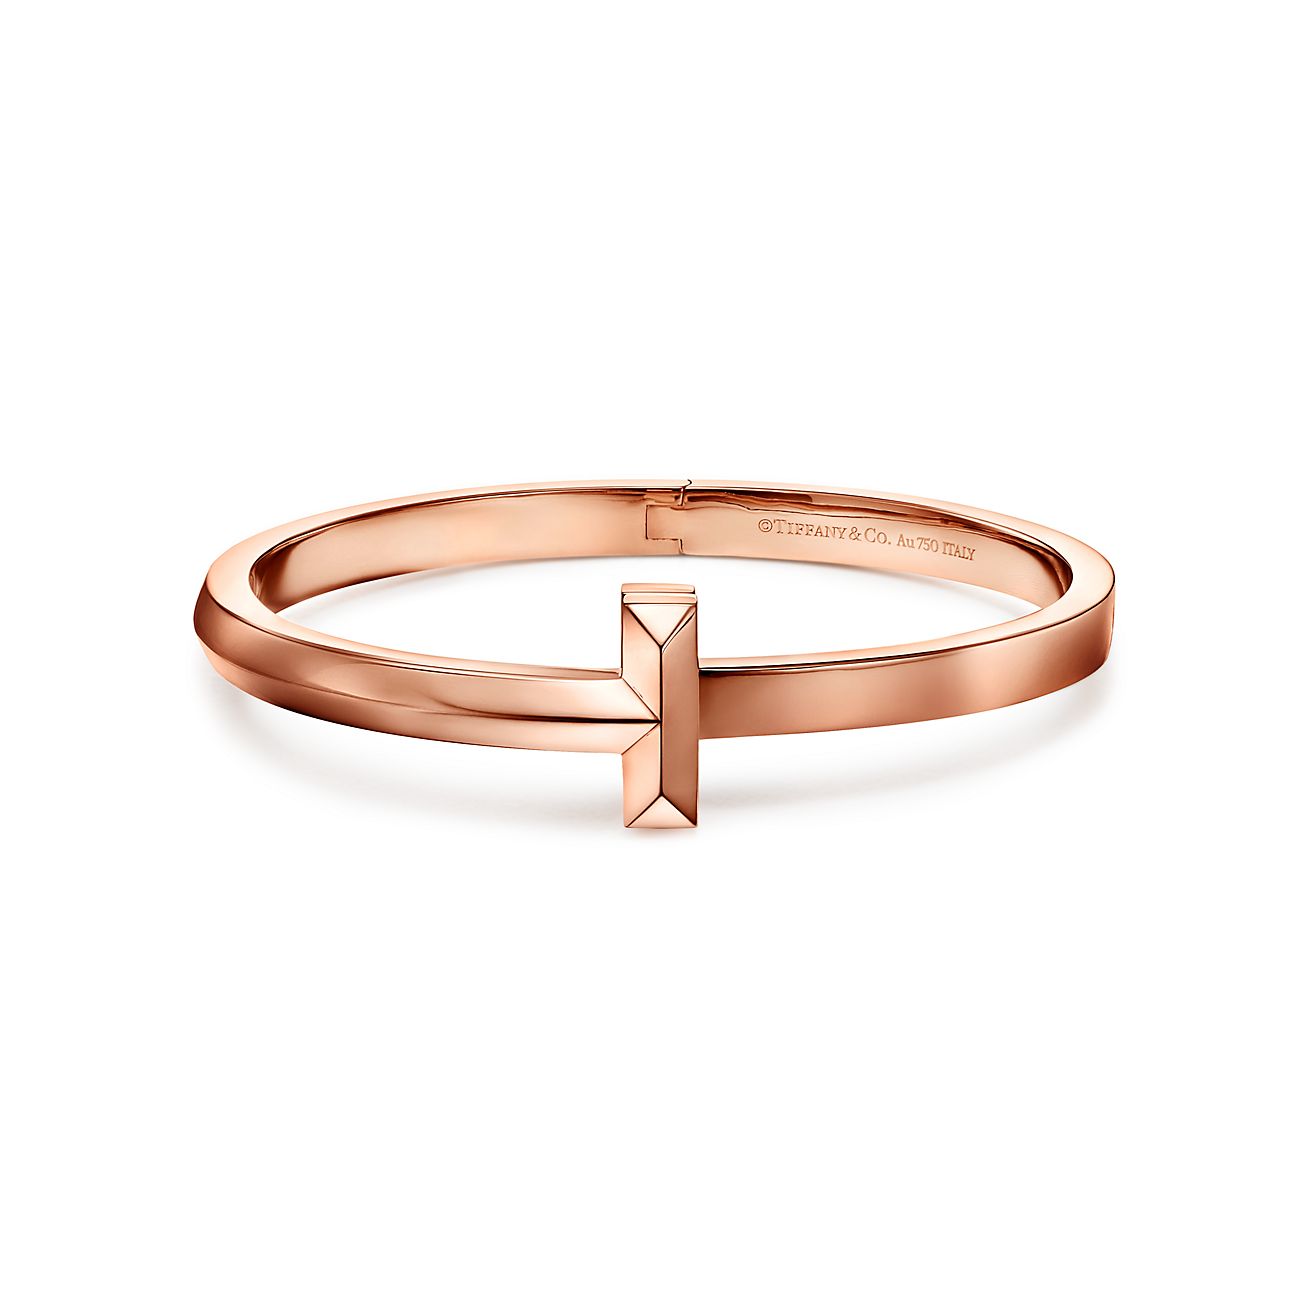 Tiffany T T1 Hinged Bangle in Rose Gold 